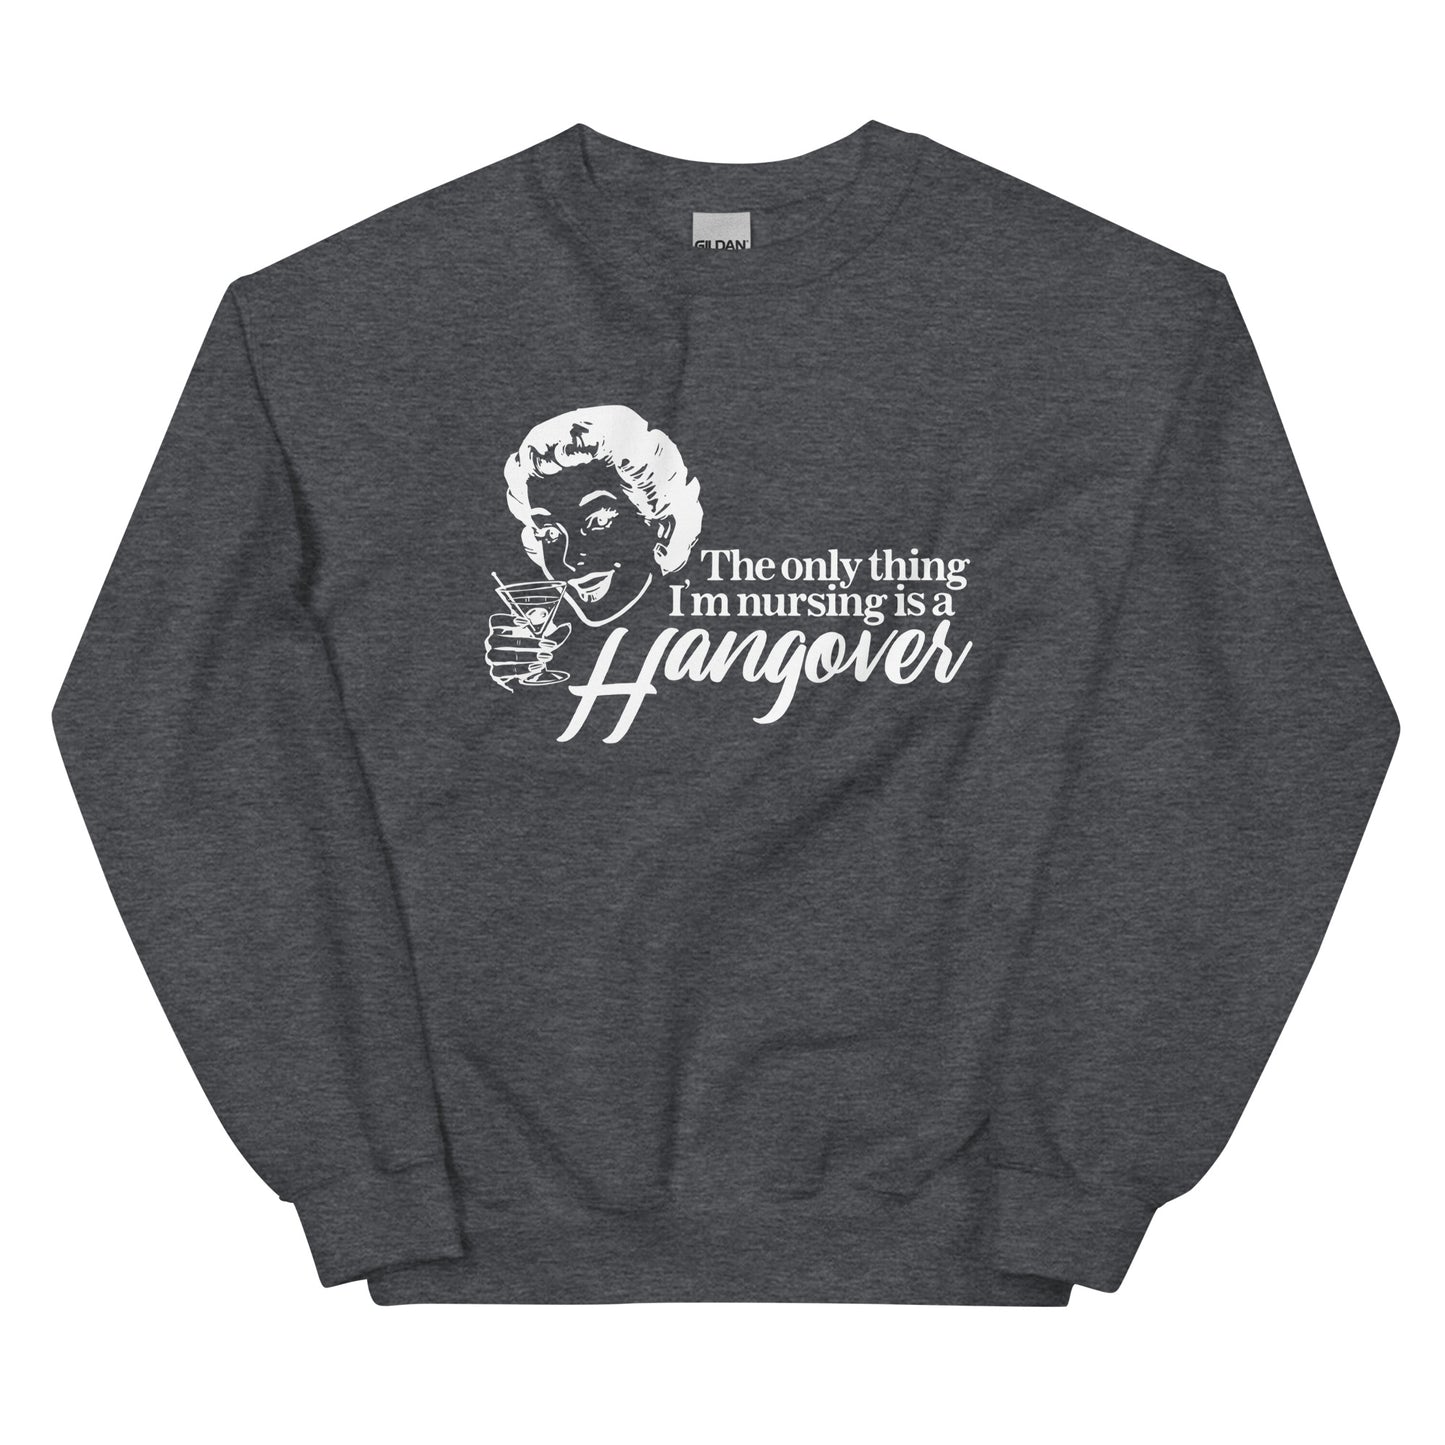 The Only Thing I'm Nursing is a Hangover Unisex Sweatshirt